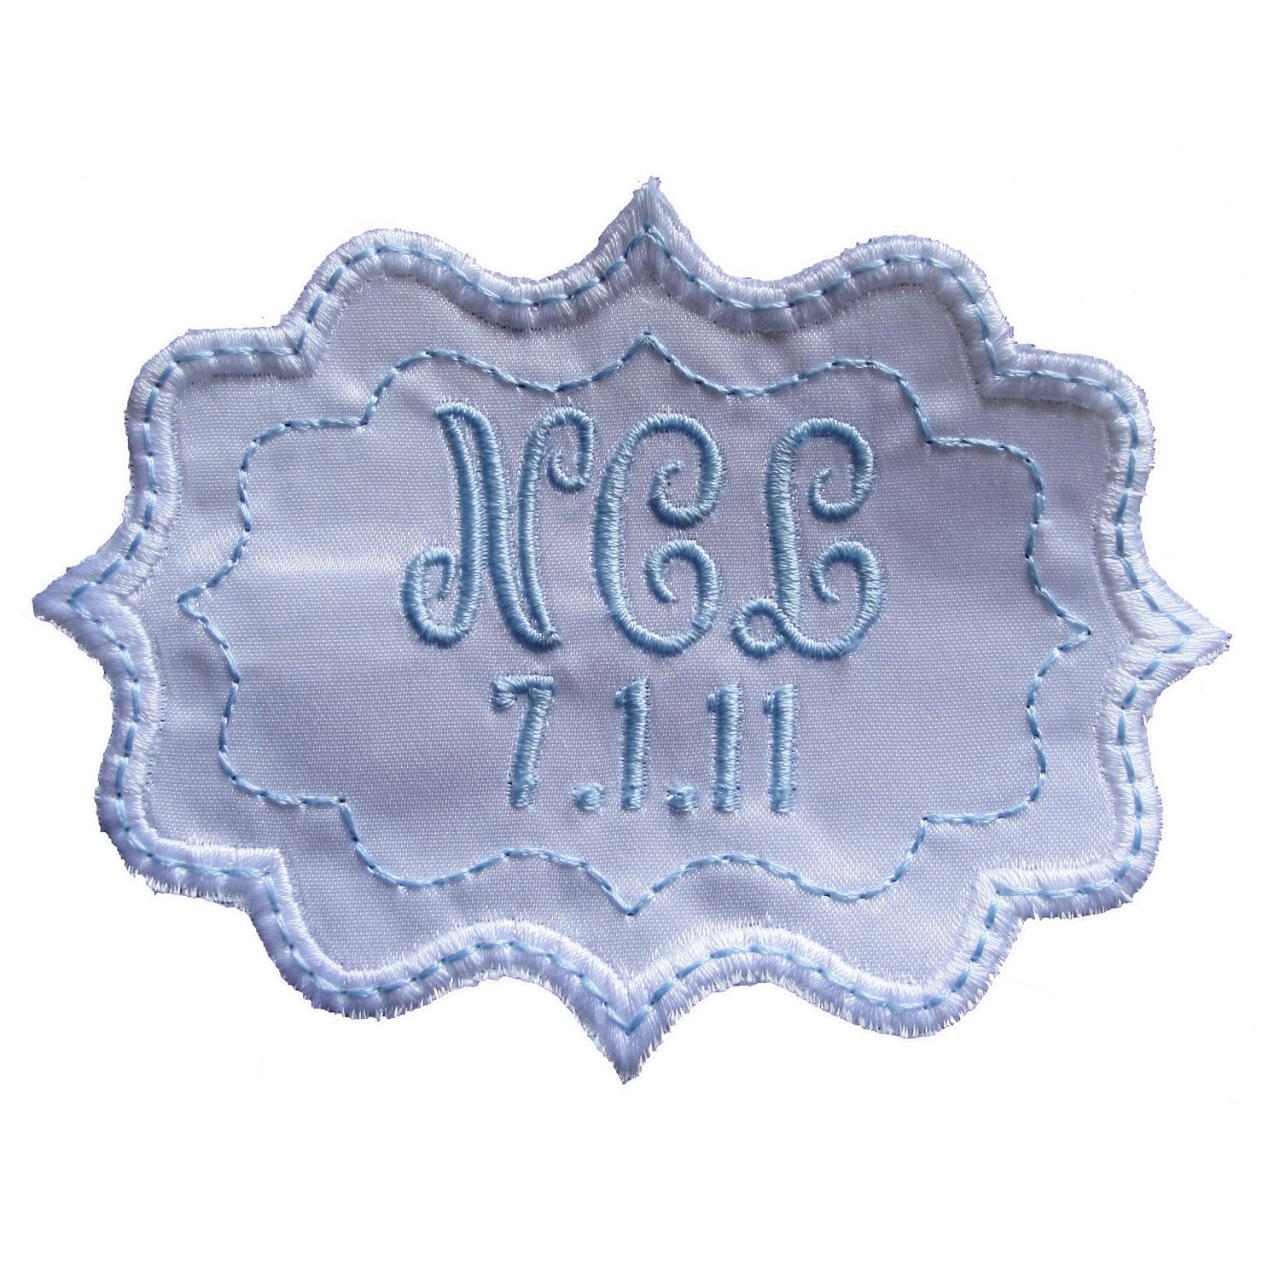 Bethany Frame Style Label In Bridal Blue And White Embroidered And Personalized